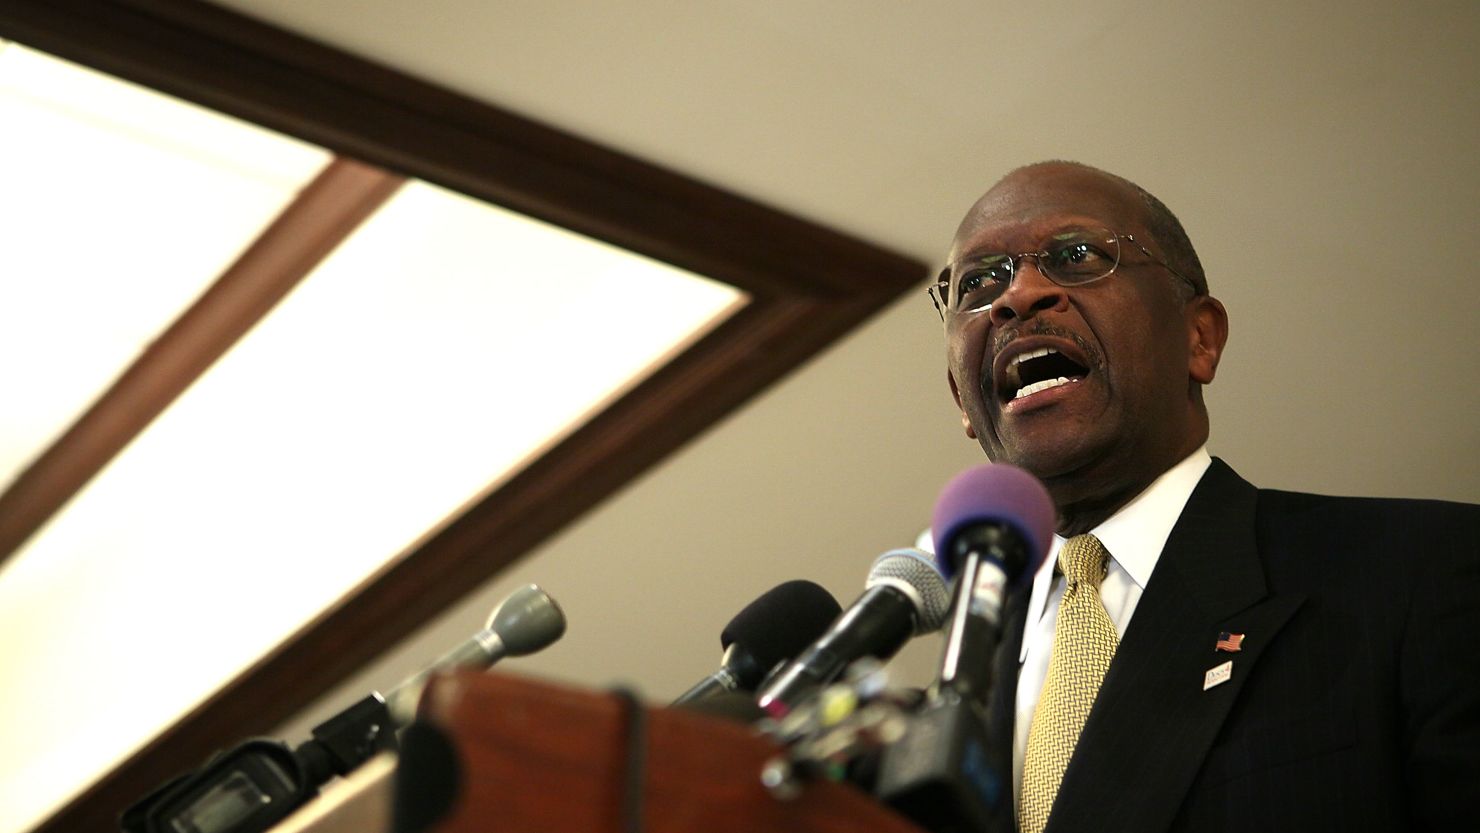 Herman Cain addresses an event Wednesday in Virginia. He didn't answer reporters' questions about harassment allegations.